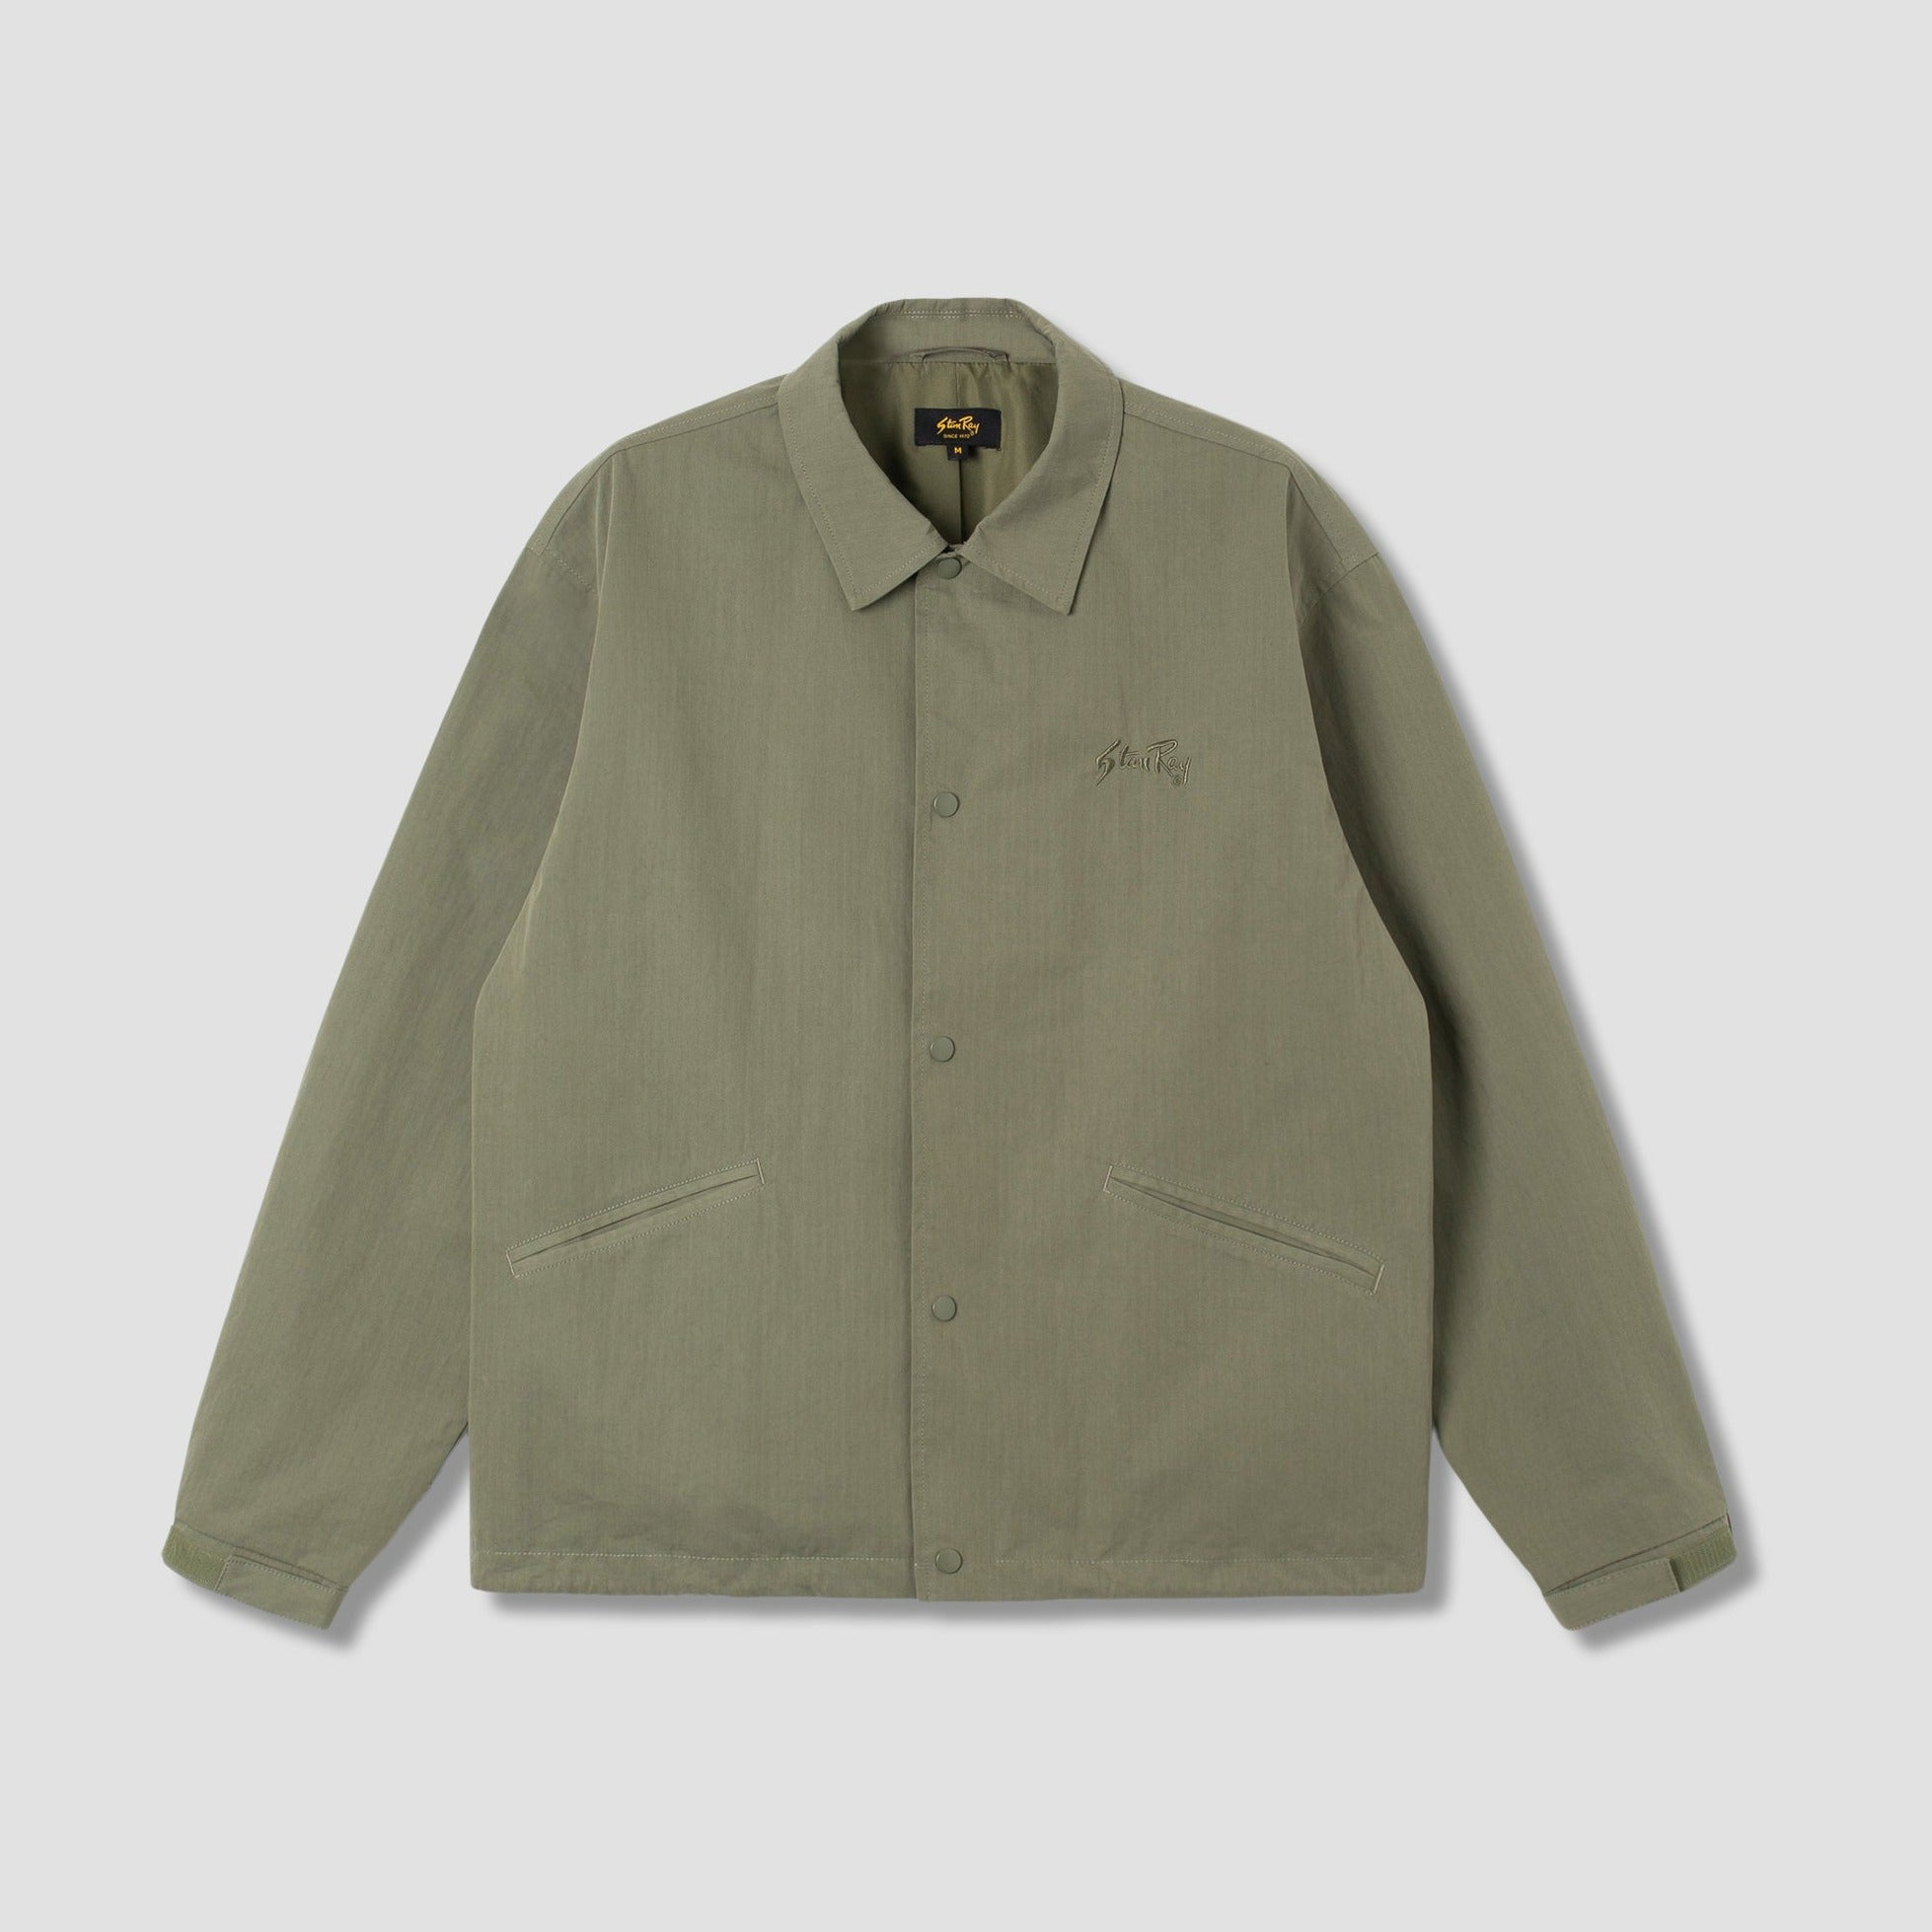 Stan Ray Coach Jacket - Olive Nyco Ripstop